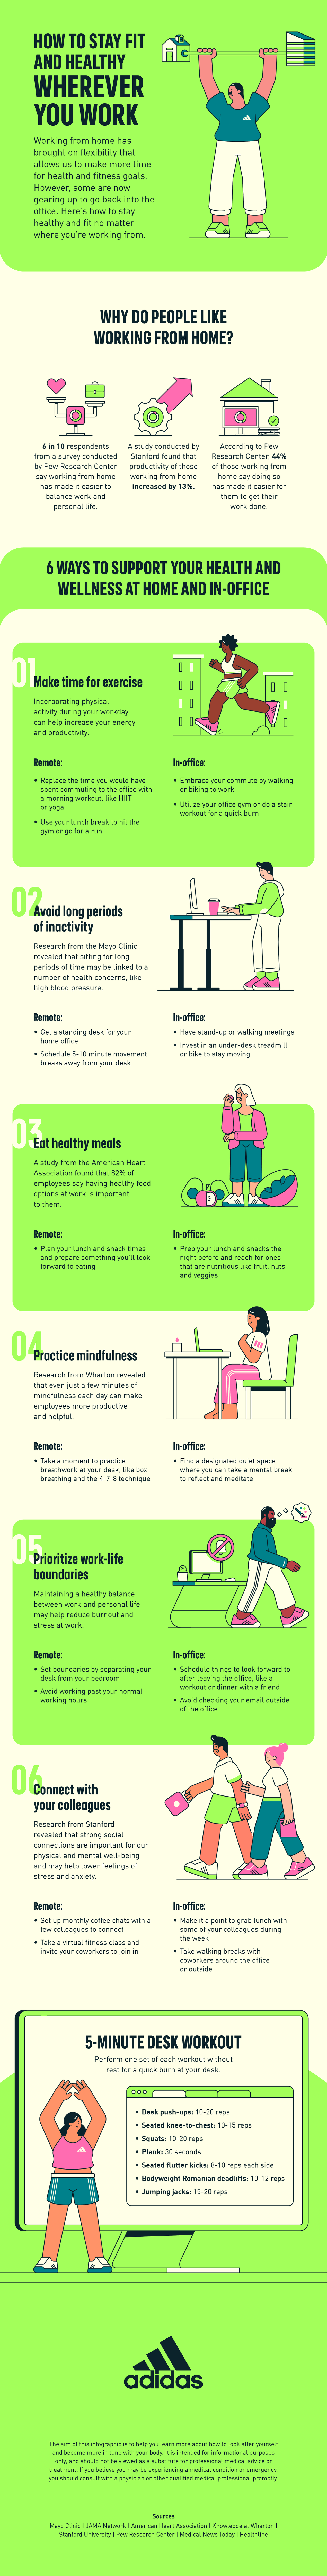 How to Stay Well Rested